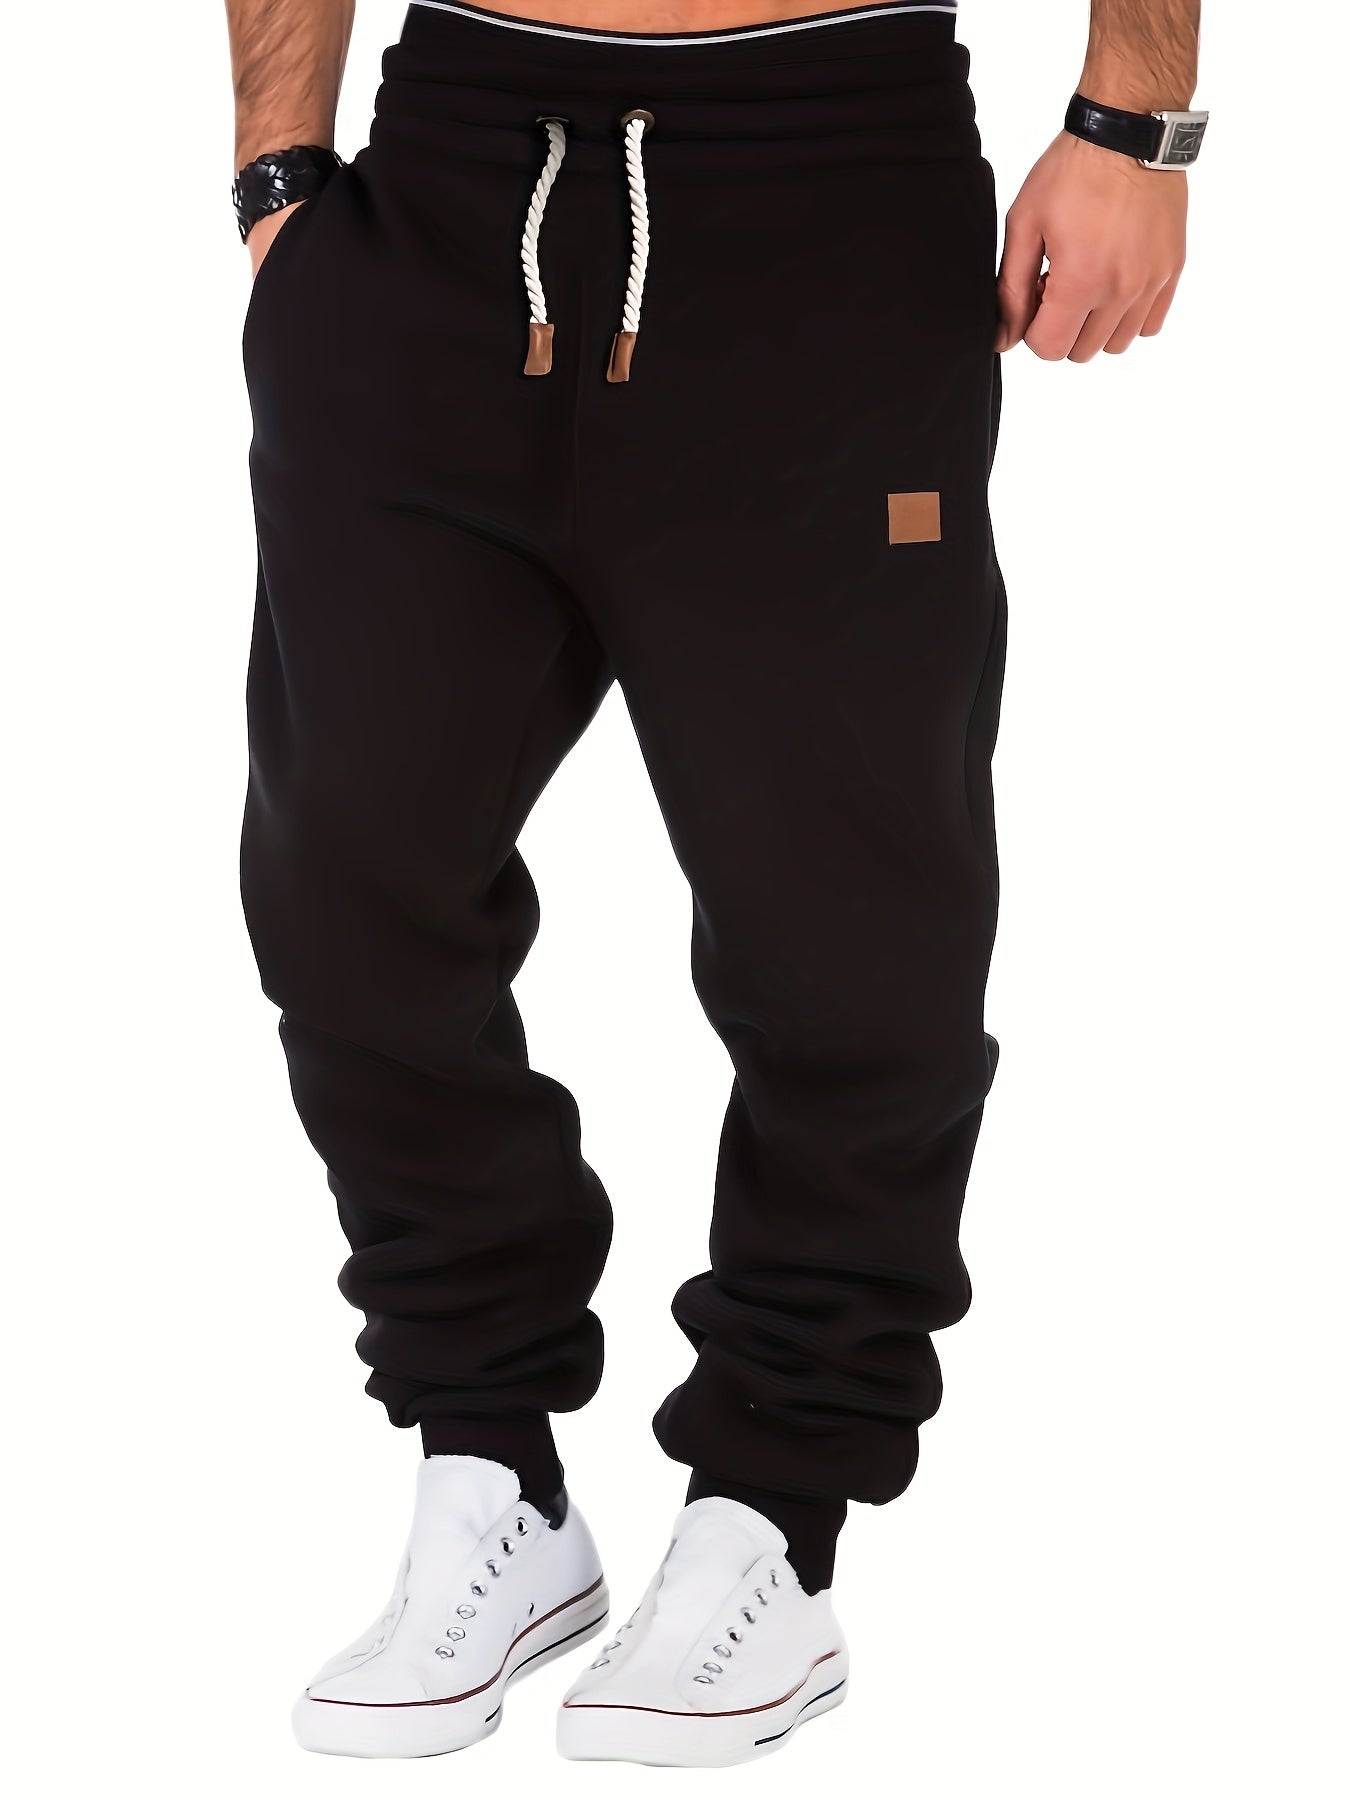 Classic Design Tapered Joggers, Men's Casual Loose Fit Slightly Stretch Waist Drawstring Pants For Fall Winter Fitness Cycling